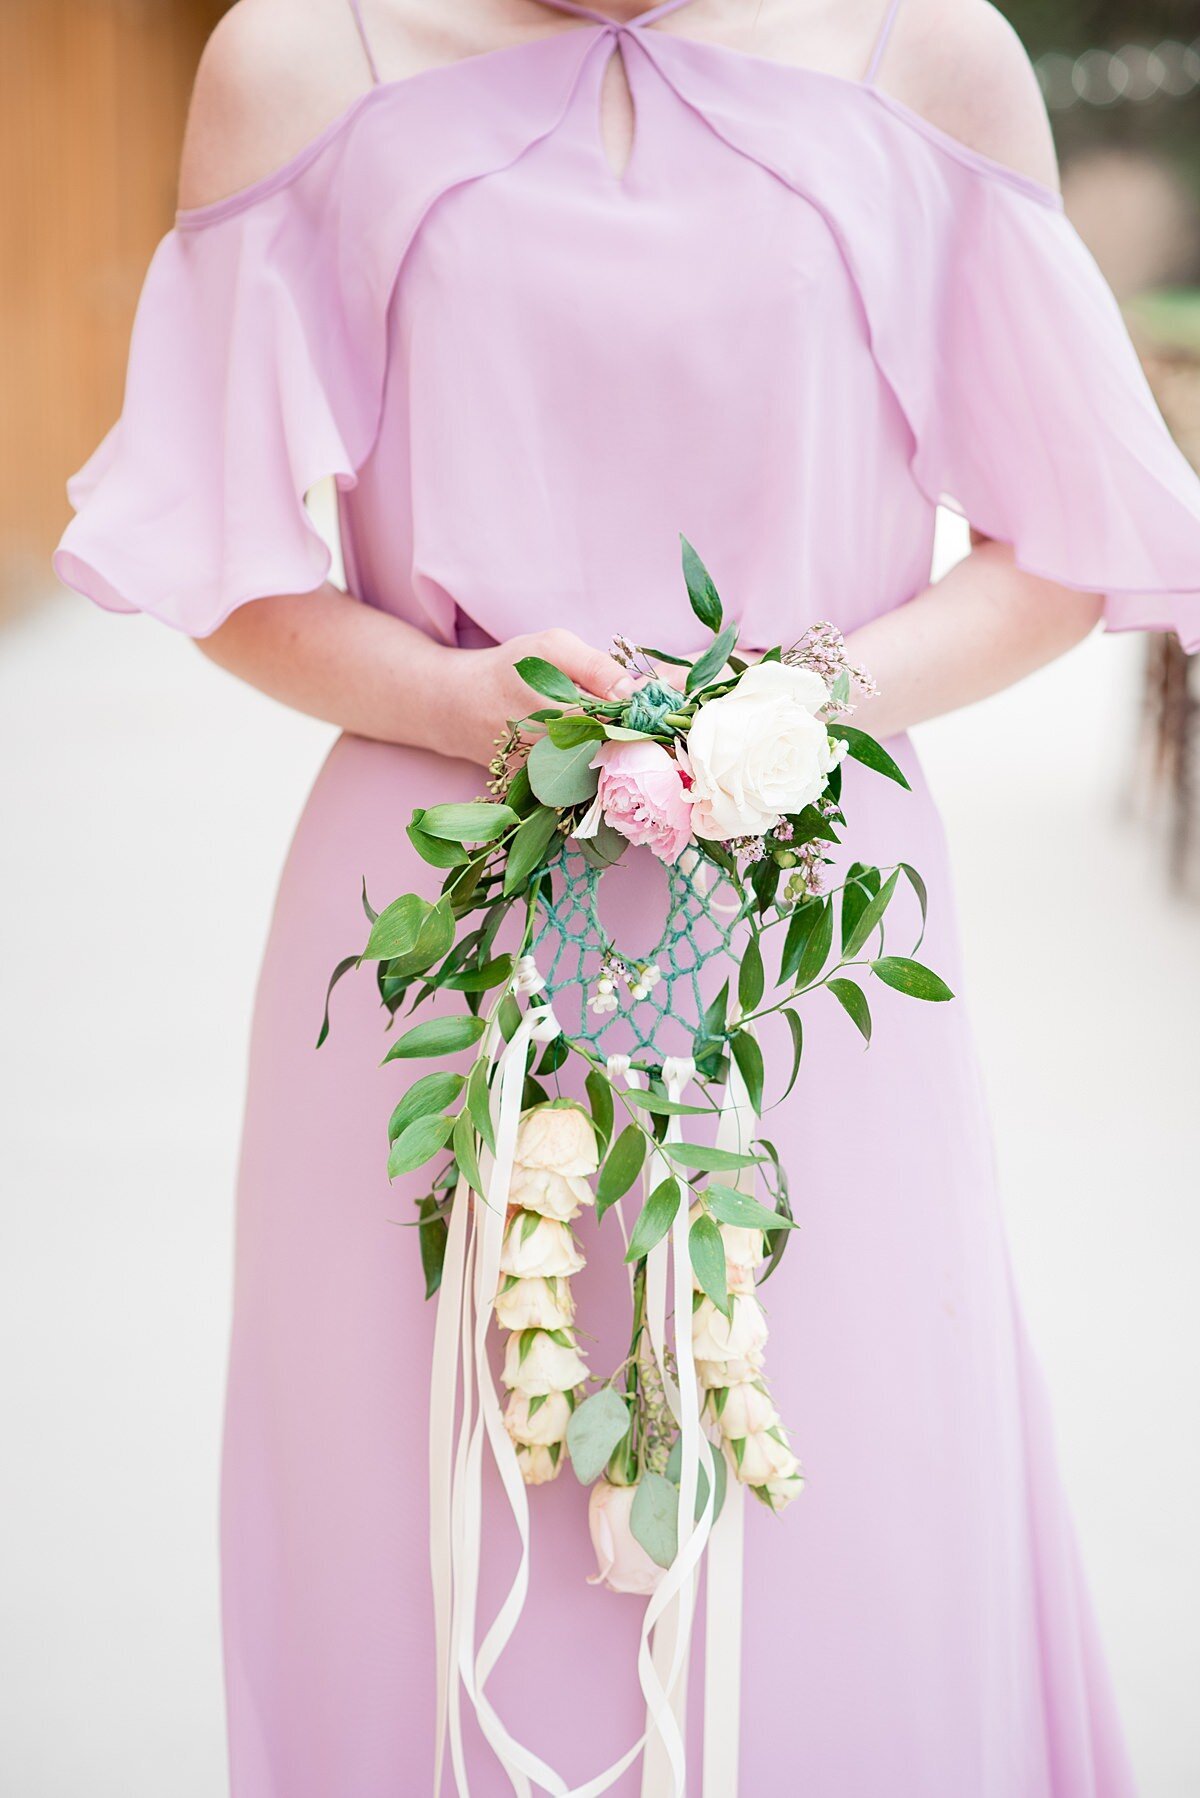 A bridesmaid wearing an off the shoulder light purple dress holds a blue dreamcatcher decorated with pink peony, Italian ruscus, long flowing white ribbons and two garlands of hanging white roses at Grace Valley Farm.